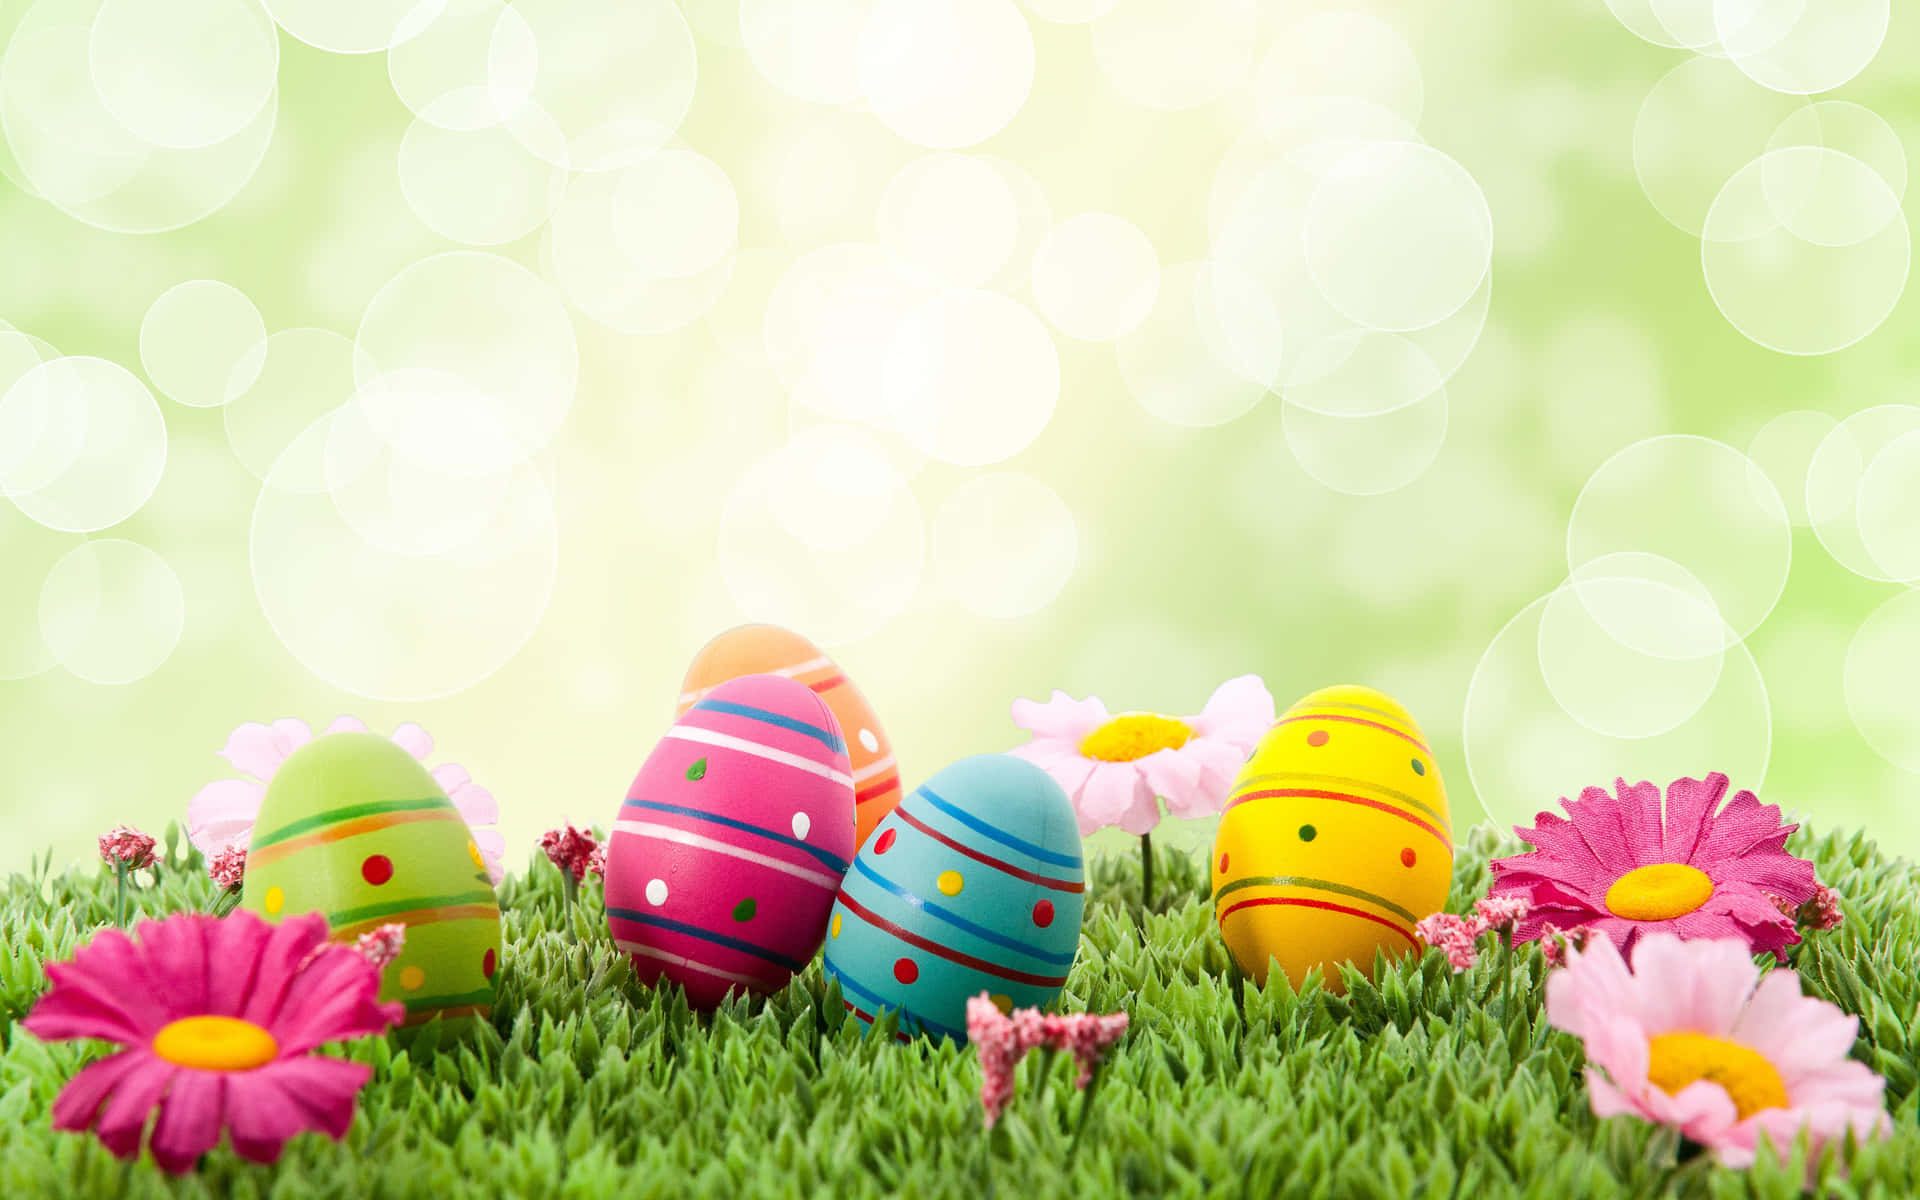 Adorable Easter Bunnies Surrounded by Colorful Eggs